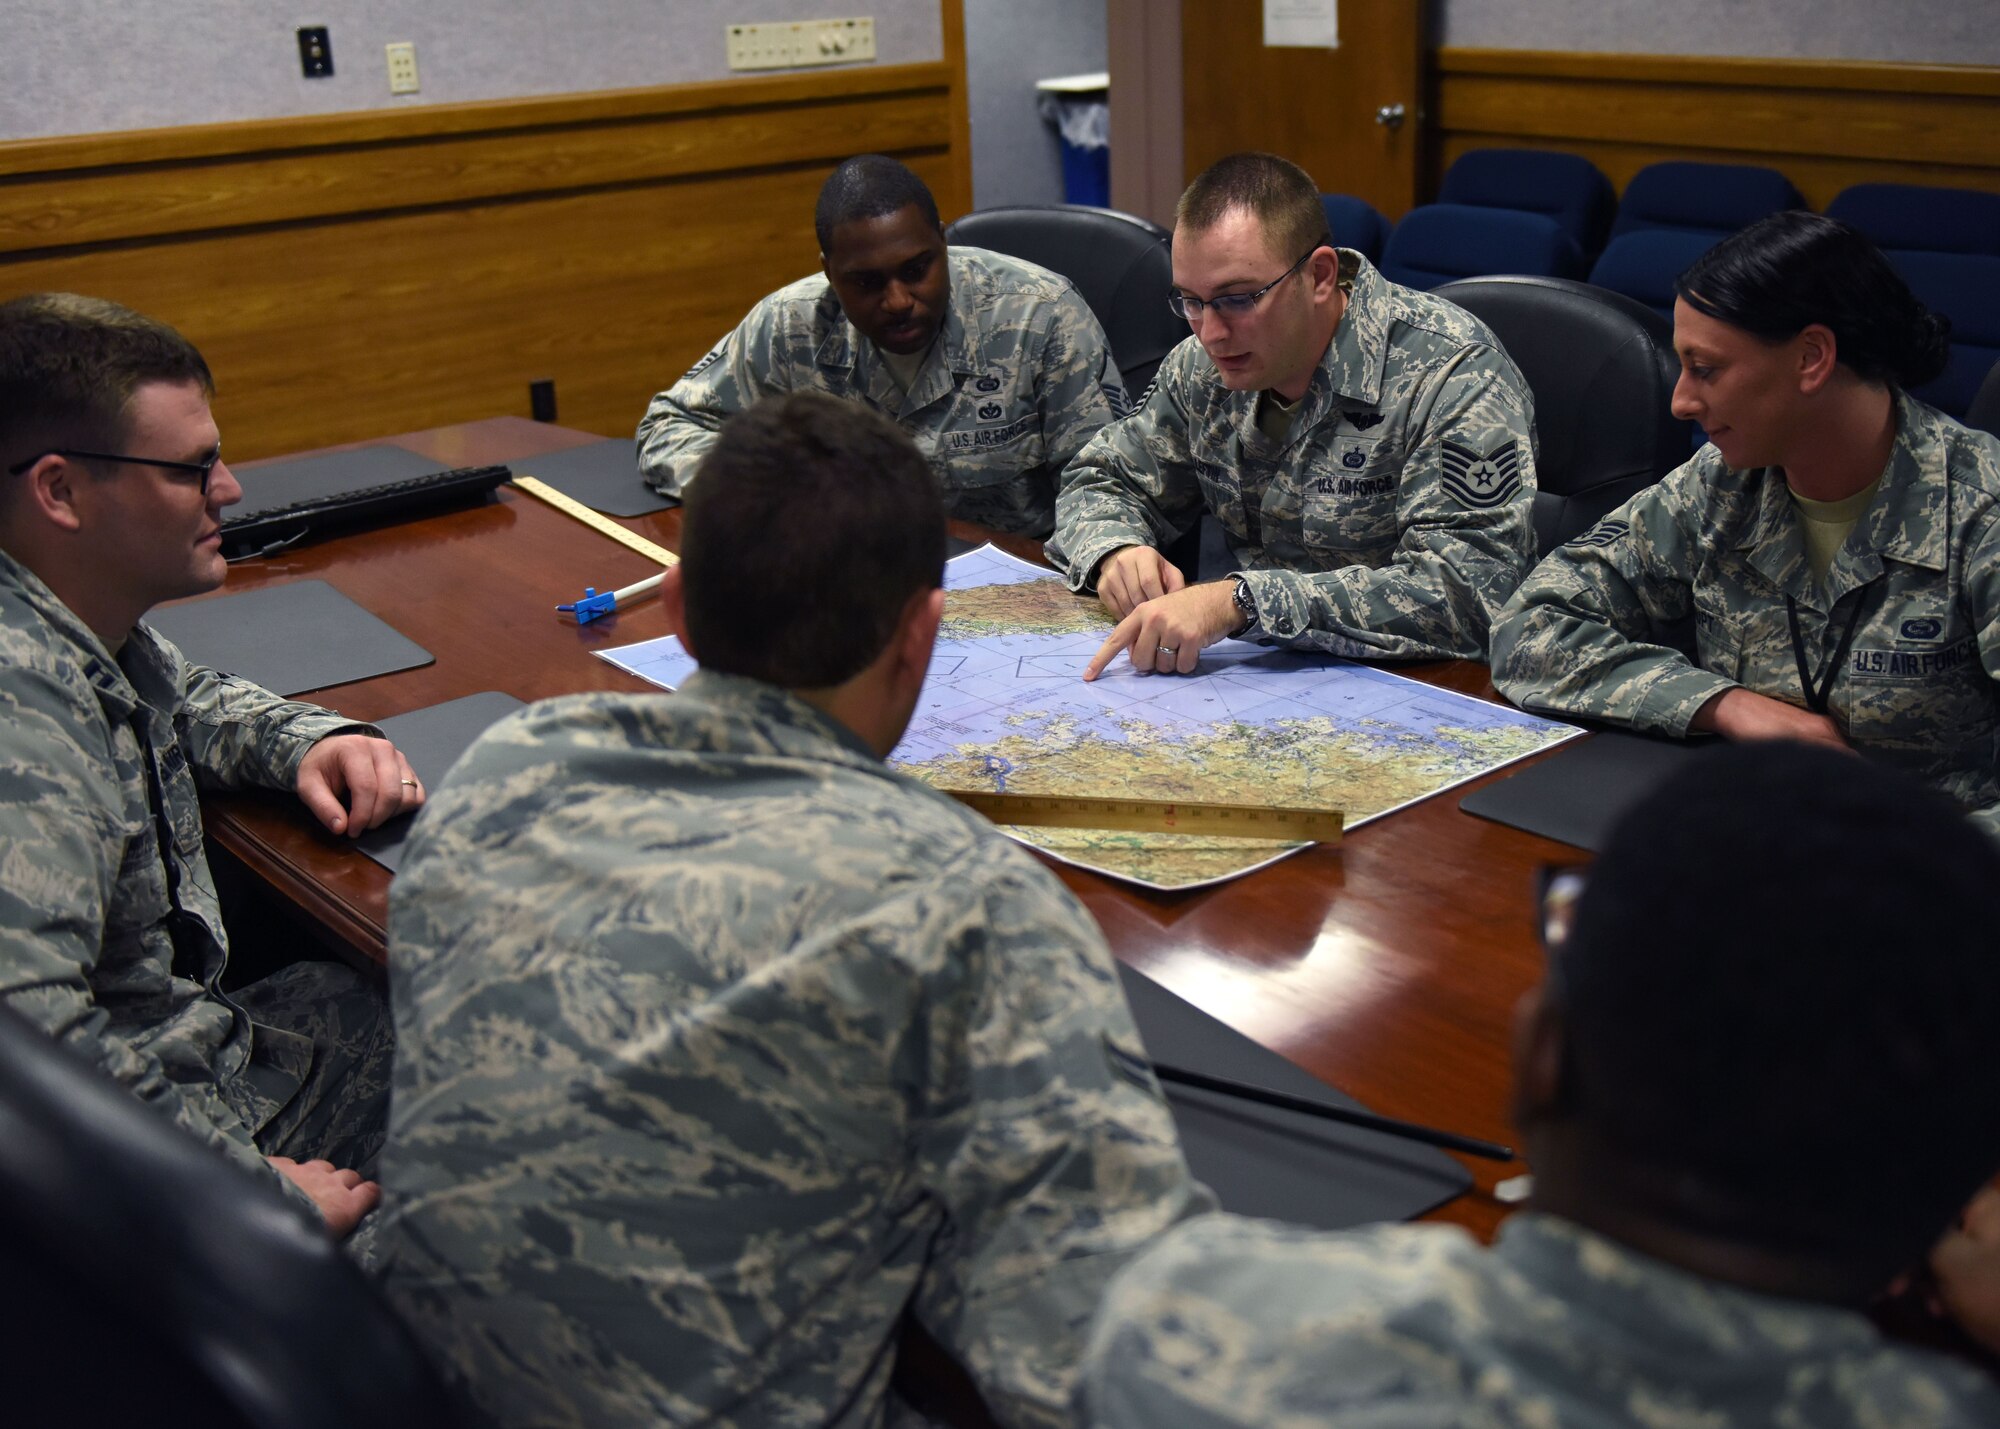 U.S. Air Force Airmen from the 325th Operations Support Squadron intelligence flight examine a map during an unclassified briefing at Tyndall Air Force Base, Fla., Oct. 25, 2017. The 325th OSS intel flight works behind the scenes analyzing and assessing information then disseminating the pertinent information to allow for better decision making. (U.S. Air Force photo by Airman 1st Class Isaiah J. Soliz/Released)